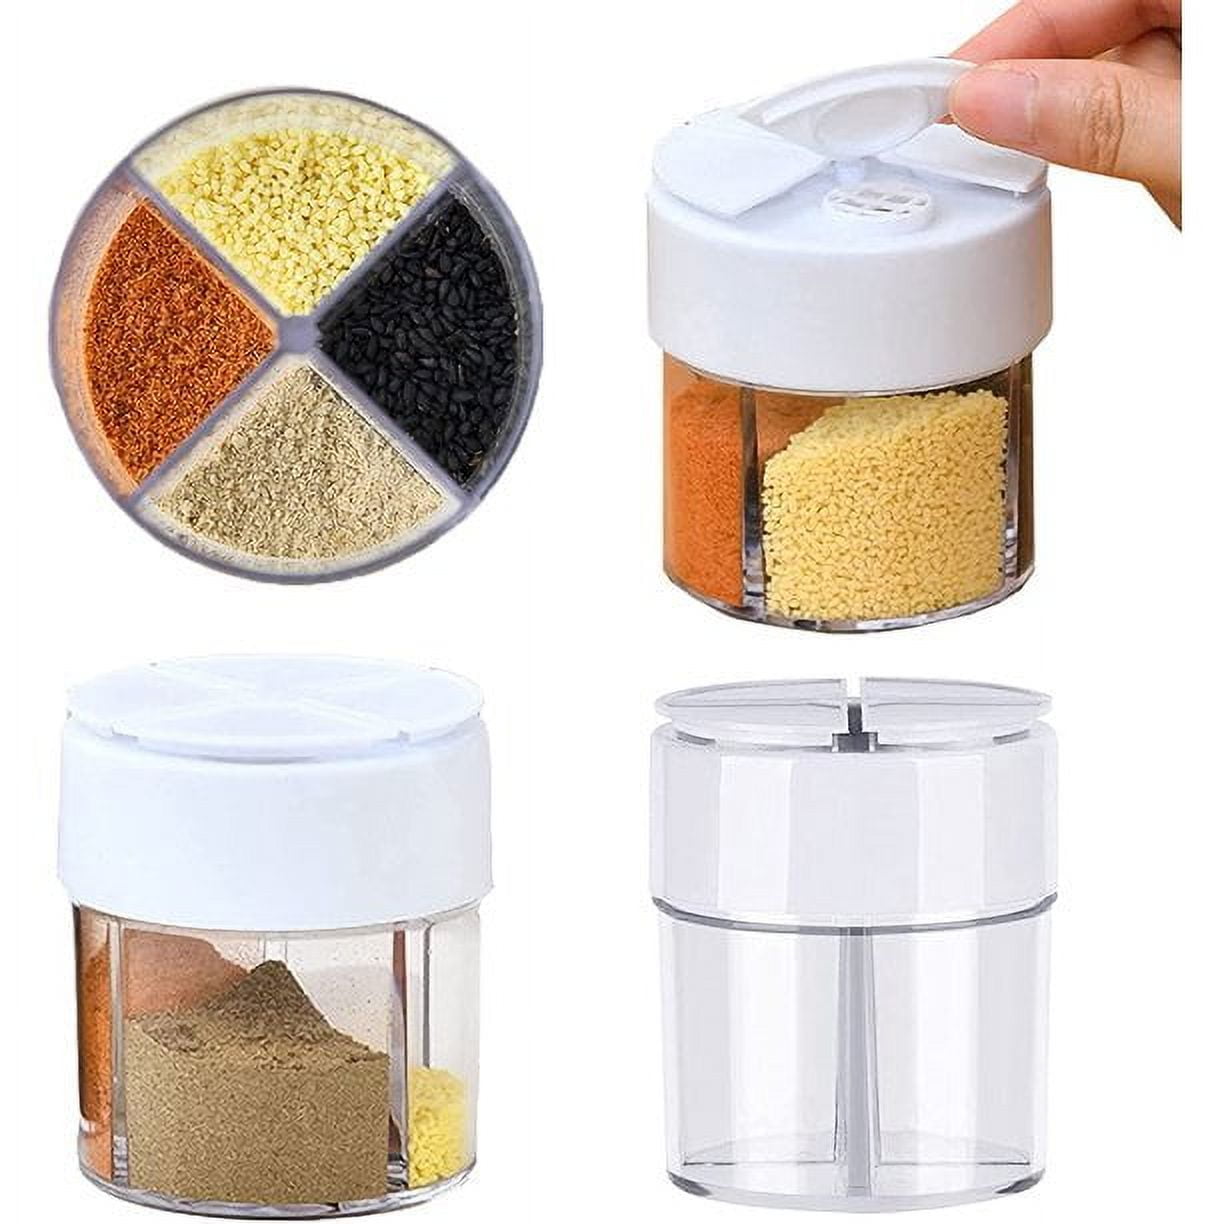 BBQ Seasoning Box, 4 in 1 Plastic Dispenser Camping Spice Containers with  Sealed lid, Seasoning Spice Shaker Travel Camping Spice Kit for Cooking,  Mini Peppers and Steak BBQ (Pack of 1/2)